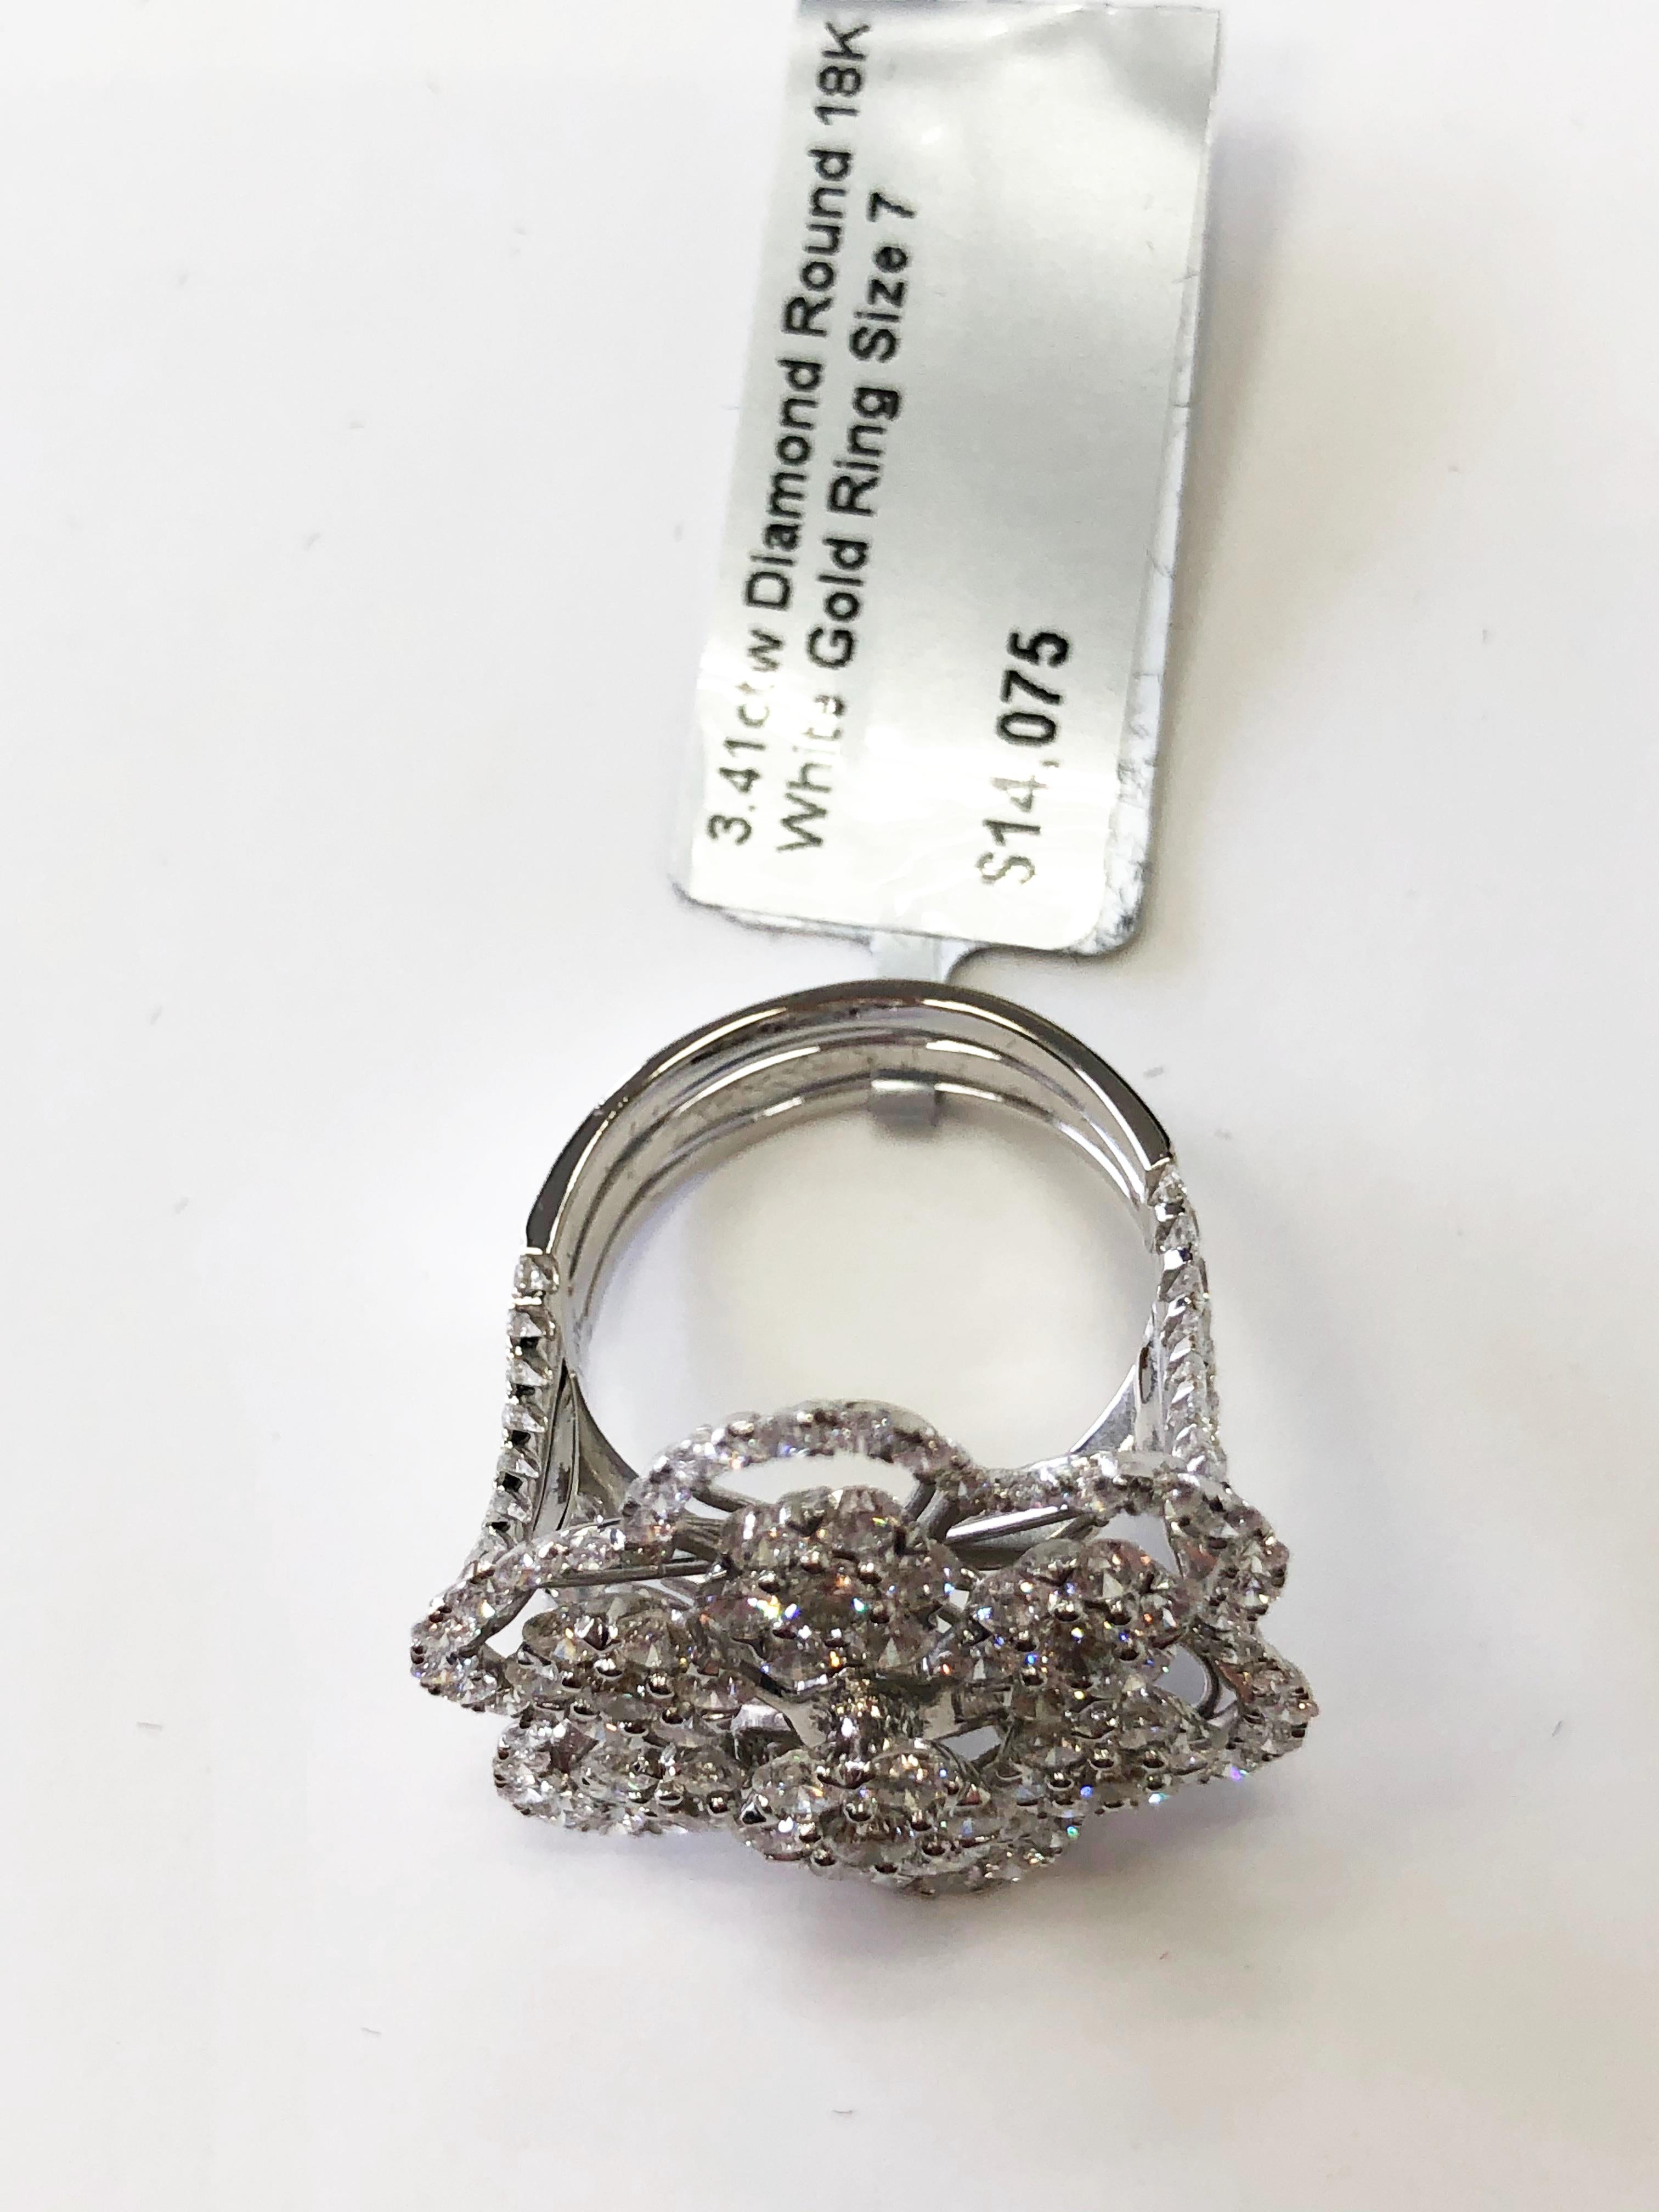 Gorgeous white diamond round floral cocktail ring in 18k white gold.  There are 3.41 carats of bright, white, good quality diamond rounds that are invisible set to make them look like they are bigger single stones.  Very well made so that there is